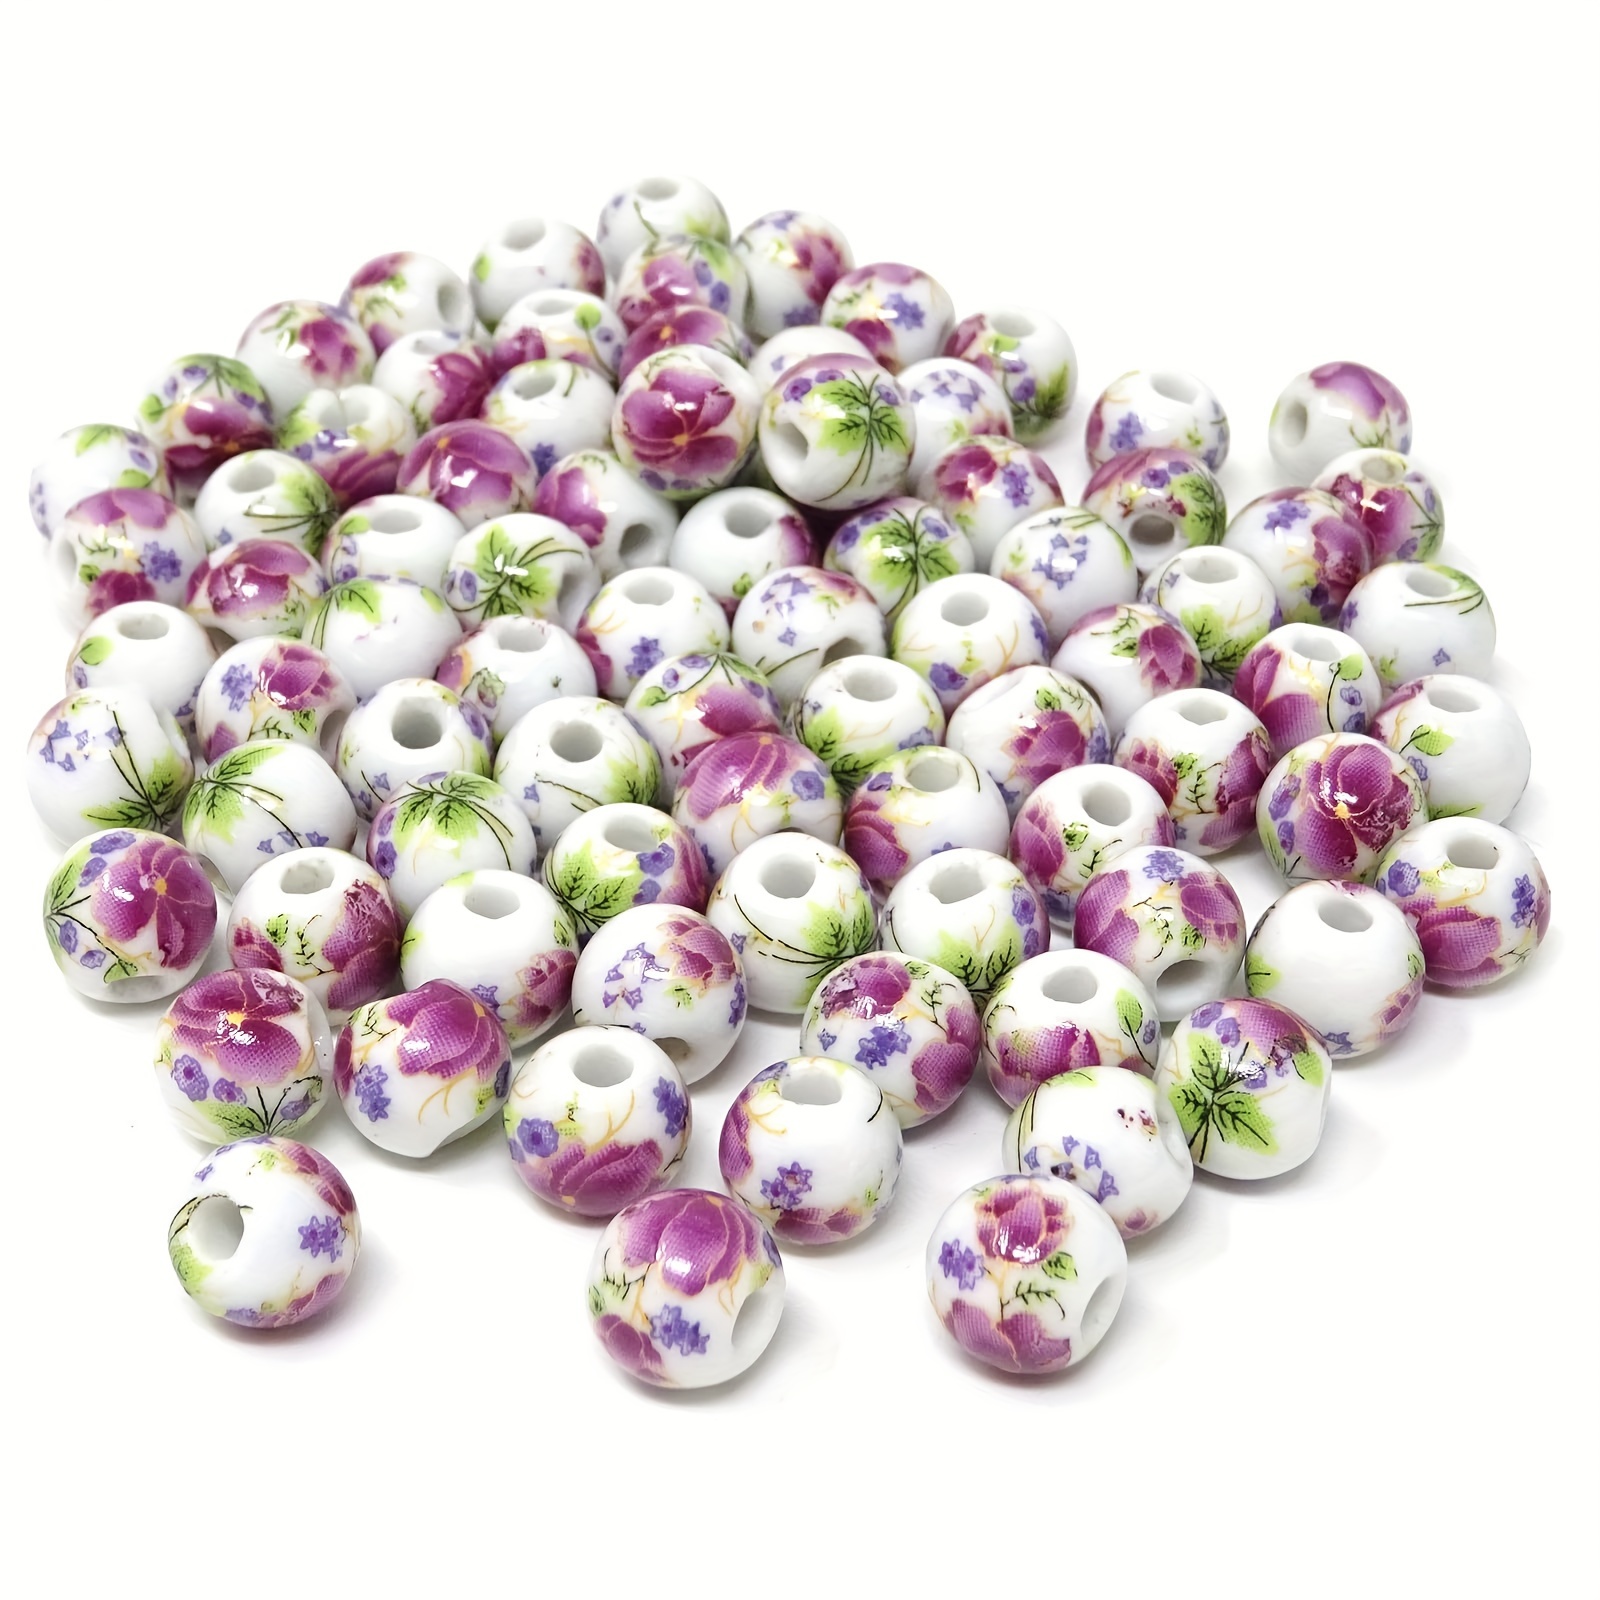 

50 Pcs 10mm Ceramic Beads Handmade Porcelain Flower Round Beads, Spacer Beads, For Making Jewelry And Diy Crafts (purple Peony, Blue Flower)